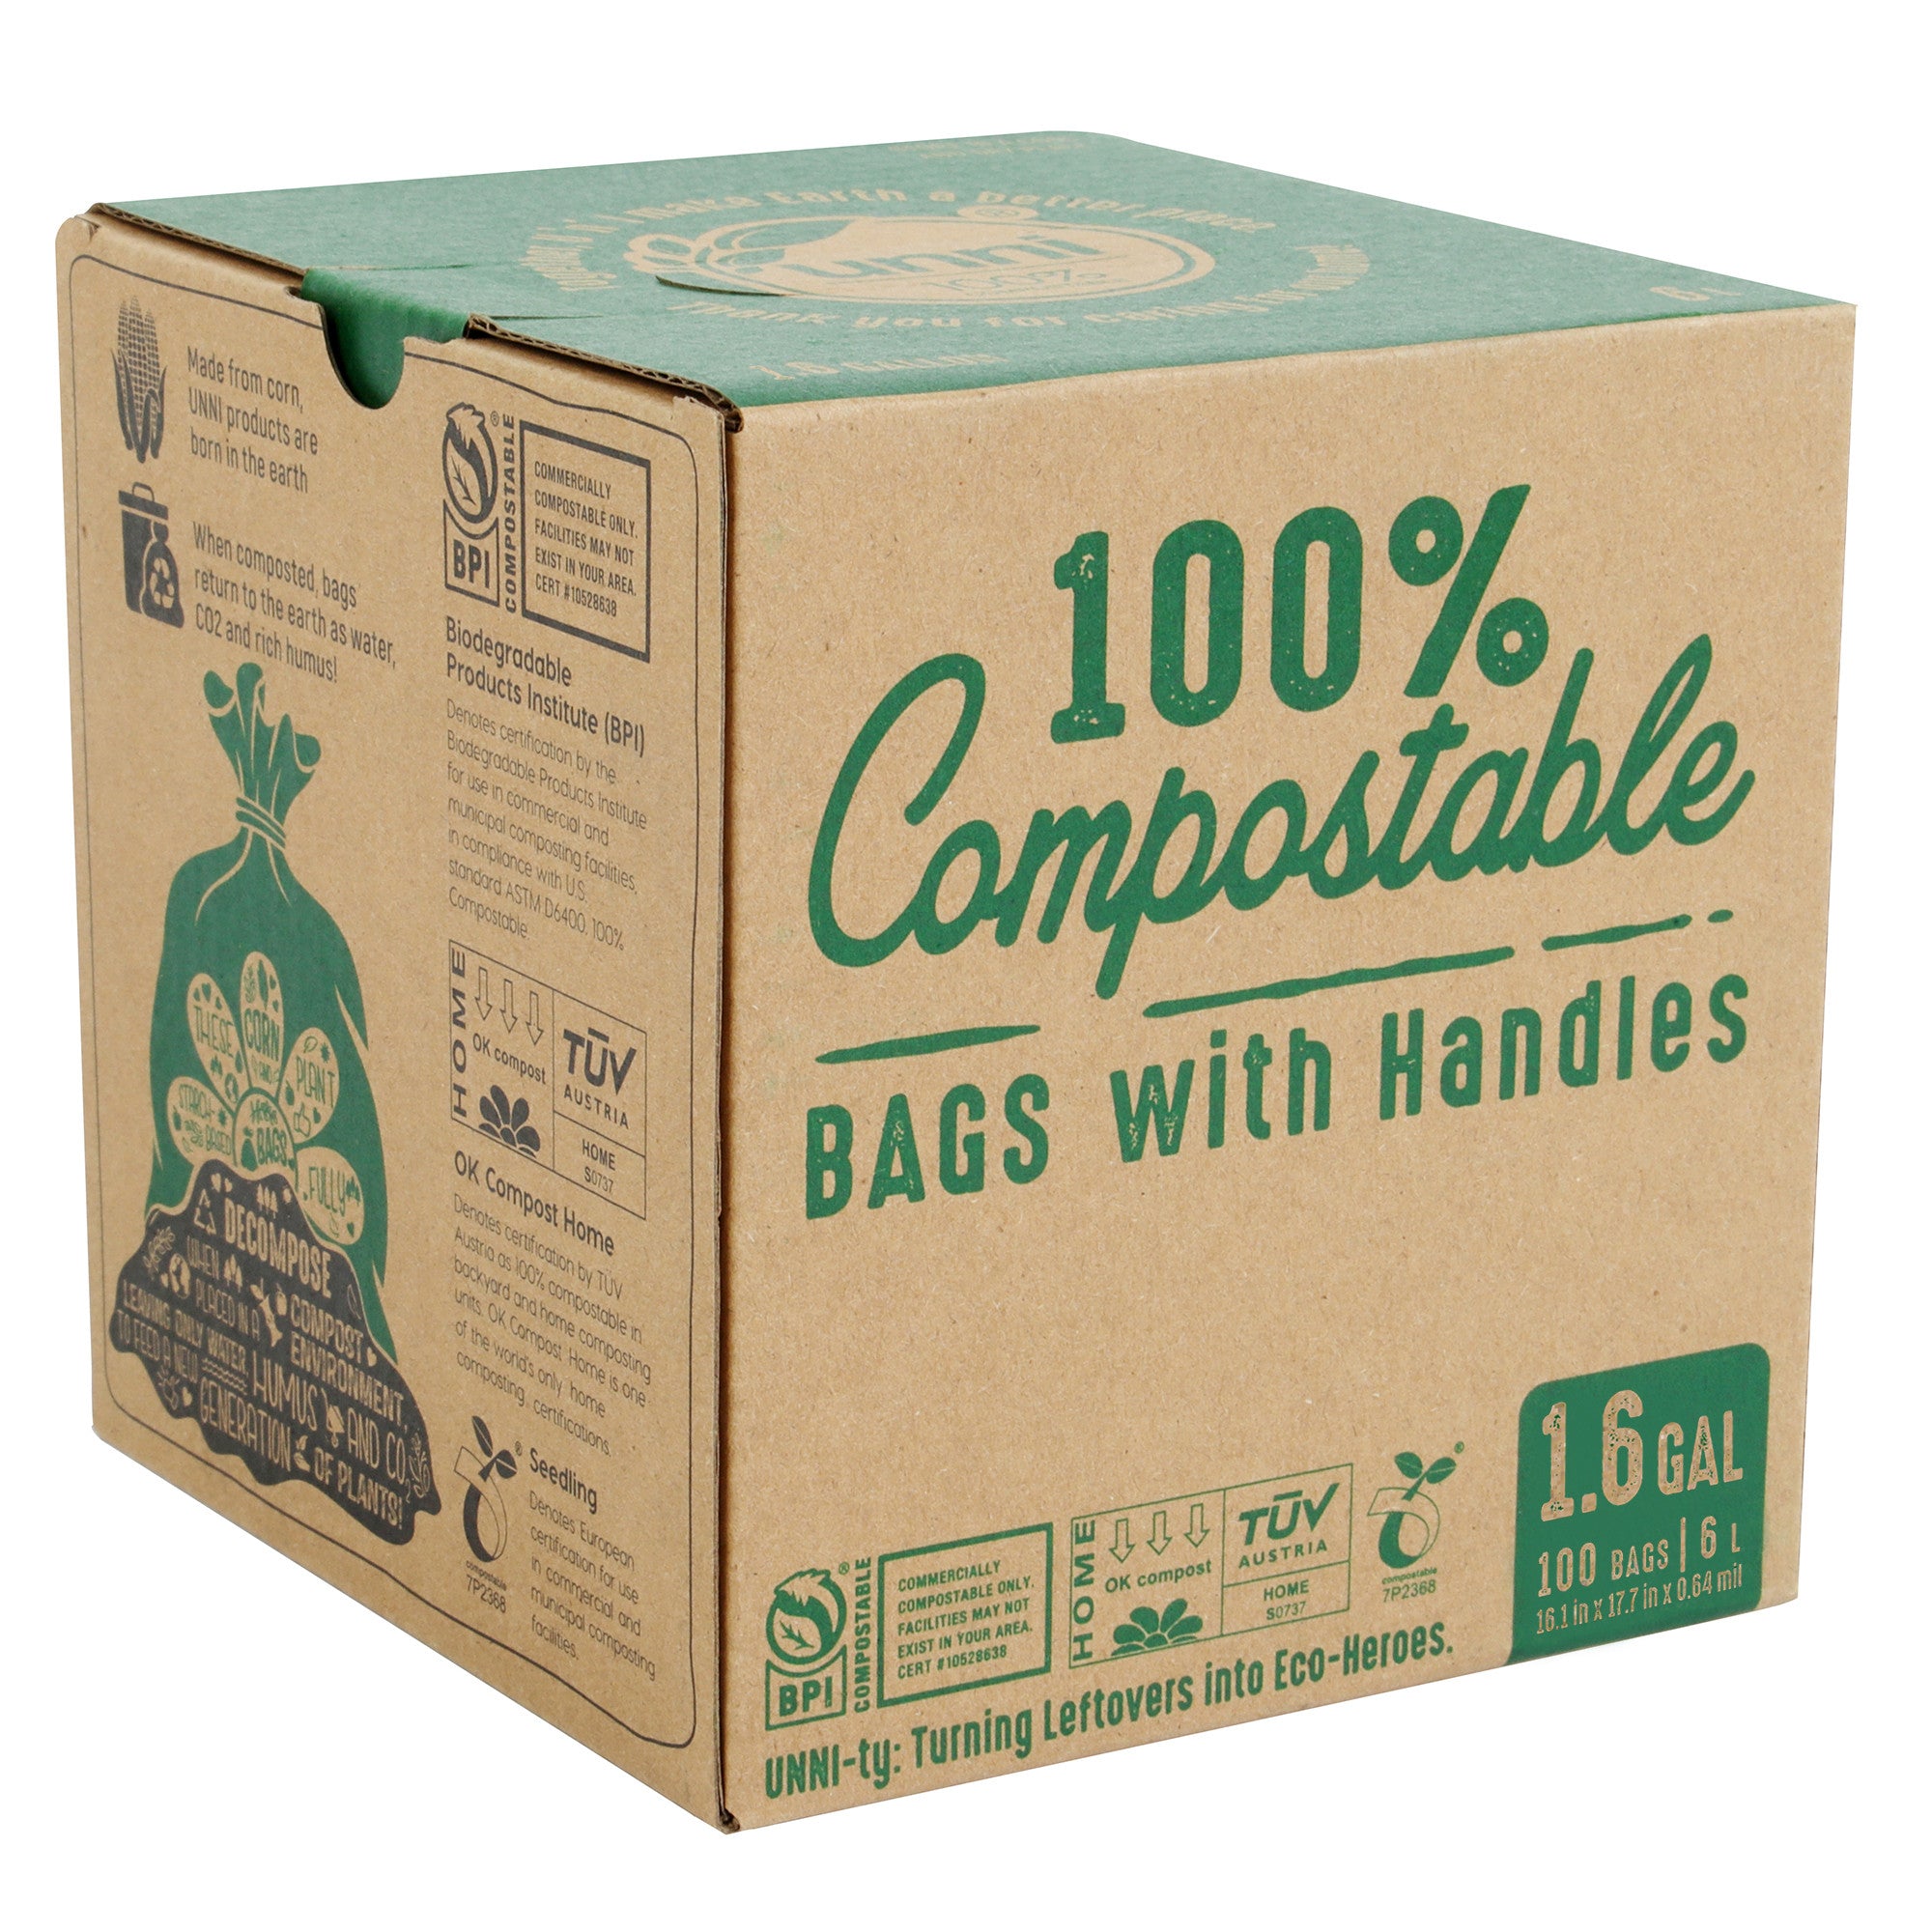 1.6 Gallon, 6 Liter,  Compostable Bags with Handles